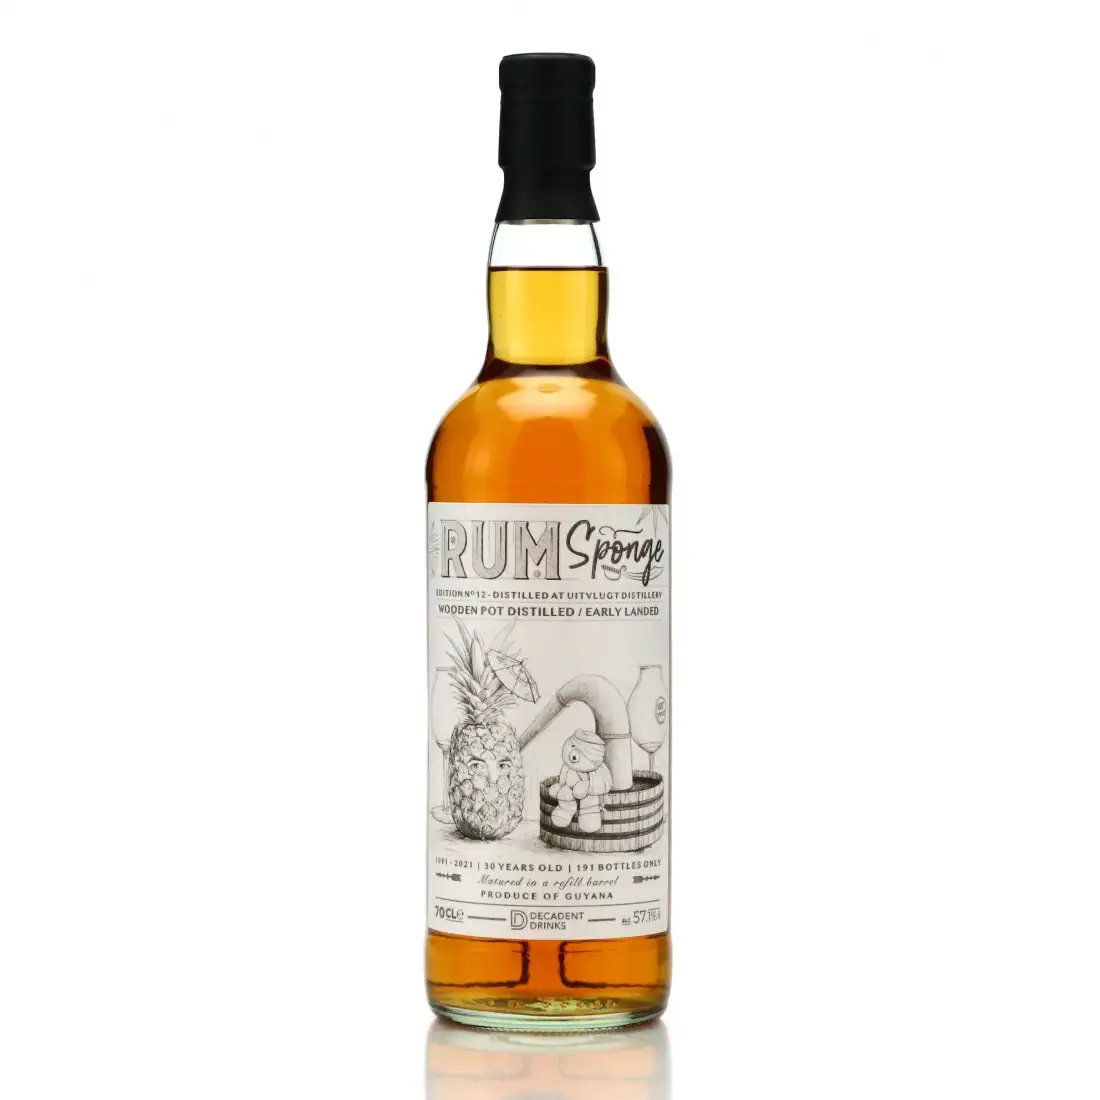 Image of the front of the bottle of the rum Rum Sponge No. 12